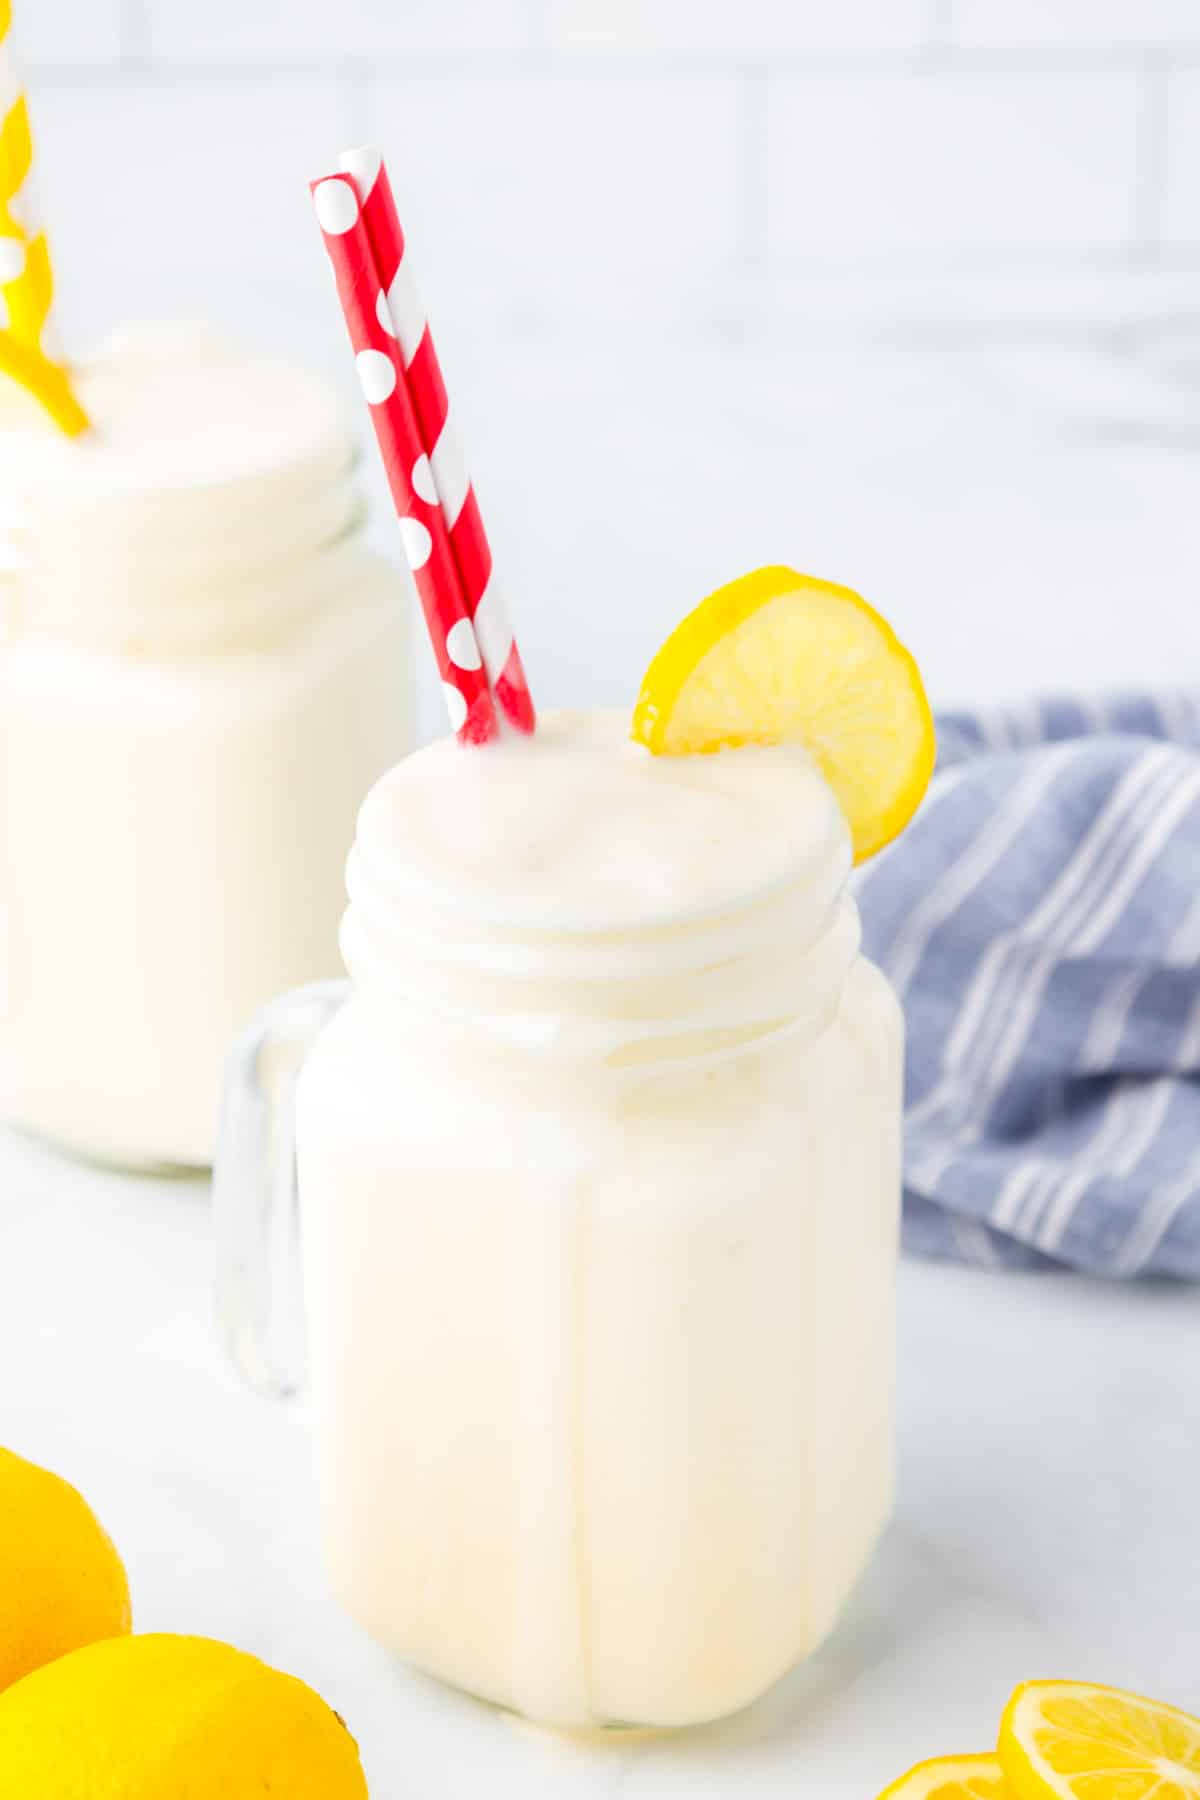 Side view of a glass jar with a handle full of frosted lemonade with a dribble down the side, topped with a fresh slice of lemon and red and white straws. . One more frosted lemonade is in the background.